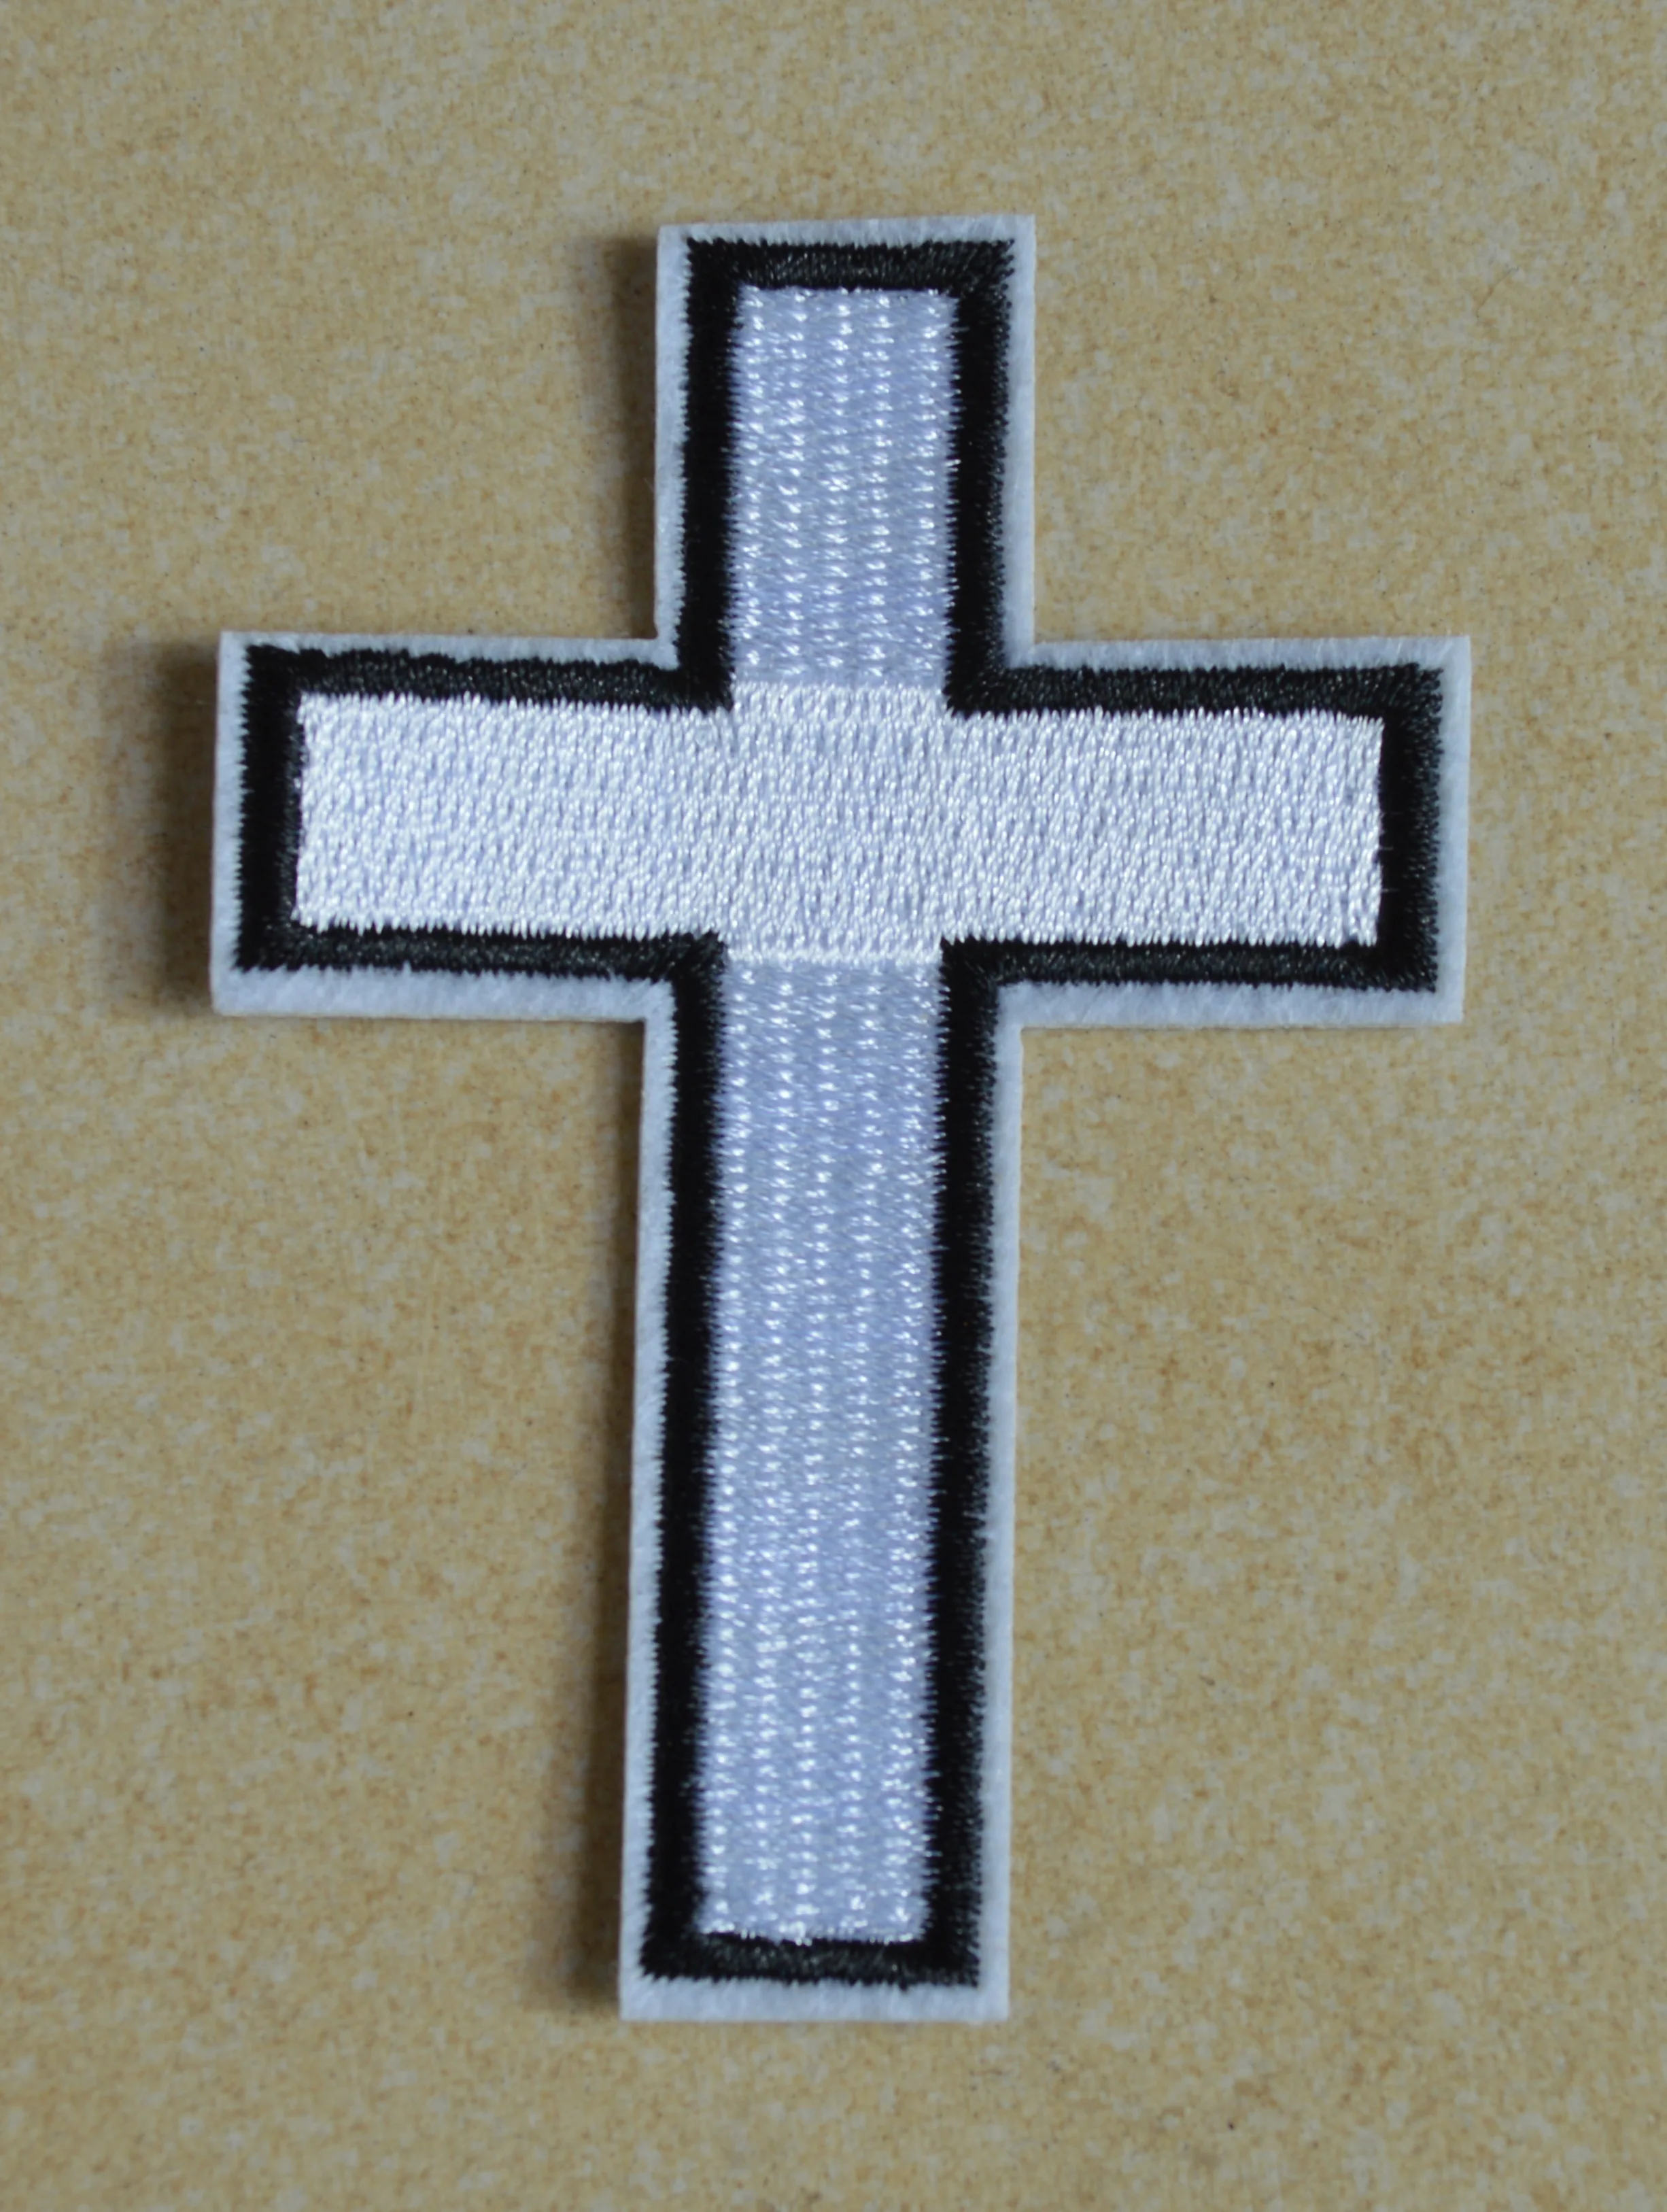 

120x Cross - Christian - White - God - Embroidered Iron On Patches, sew on patch, Made of Cloth,100% Quality